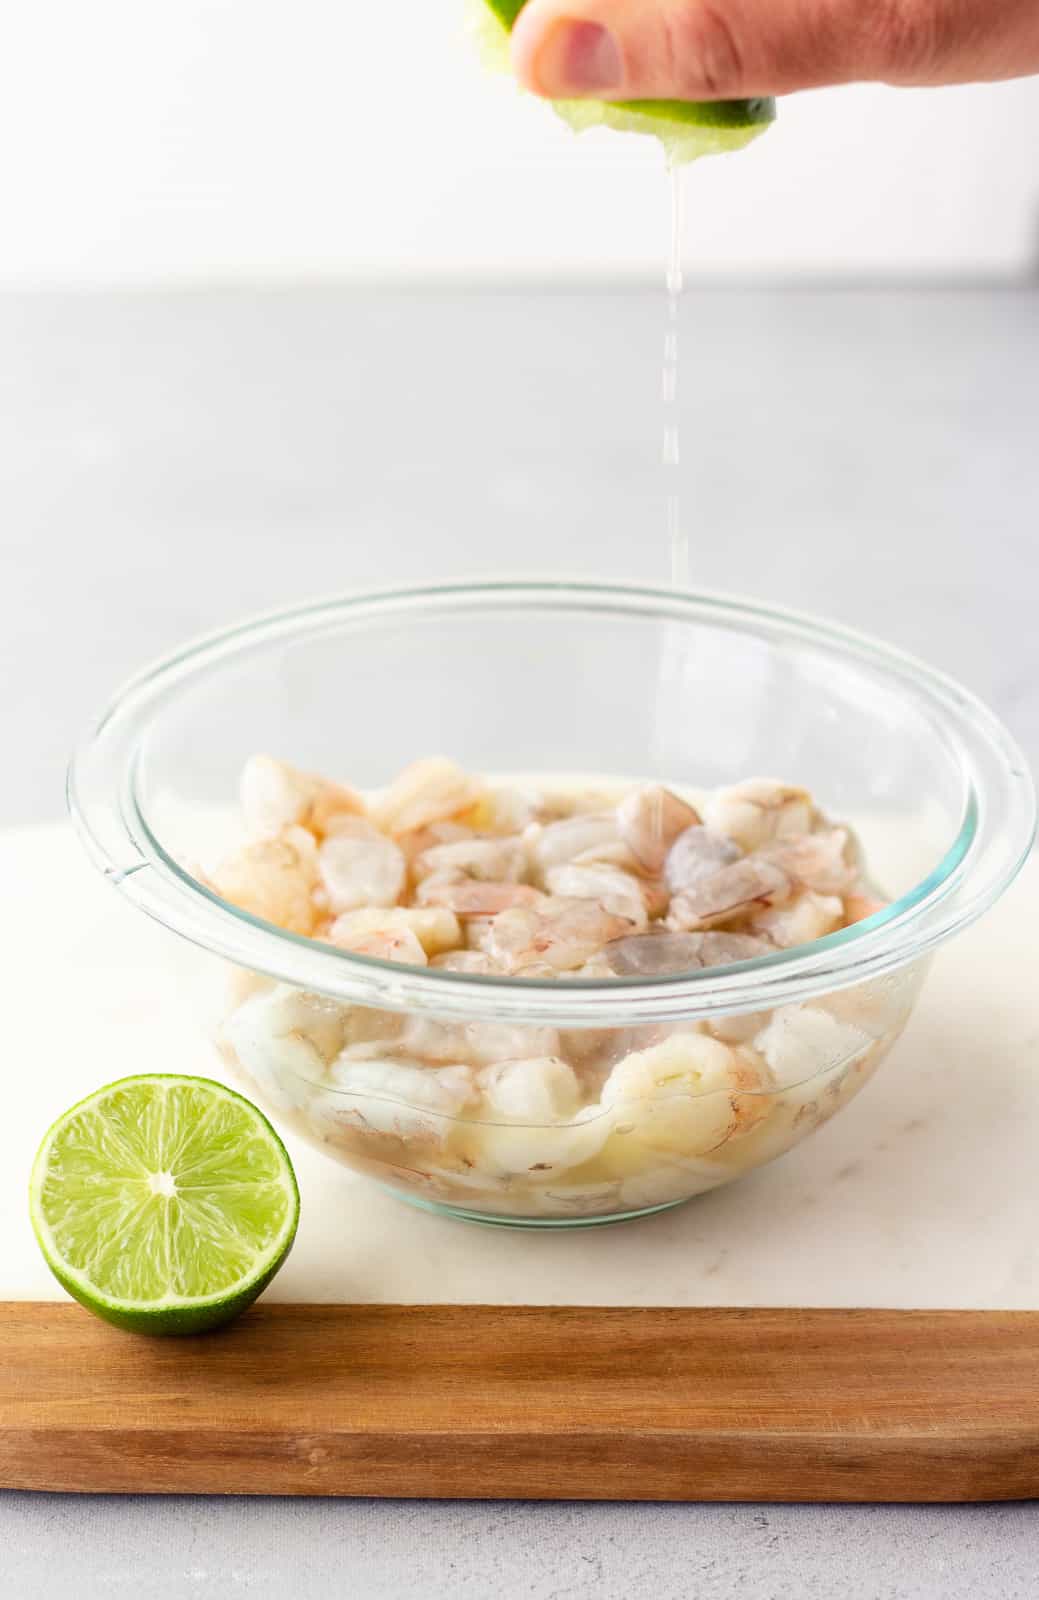 Glass bowl with raw shrimp and lime being squeezed into the bowl.